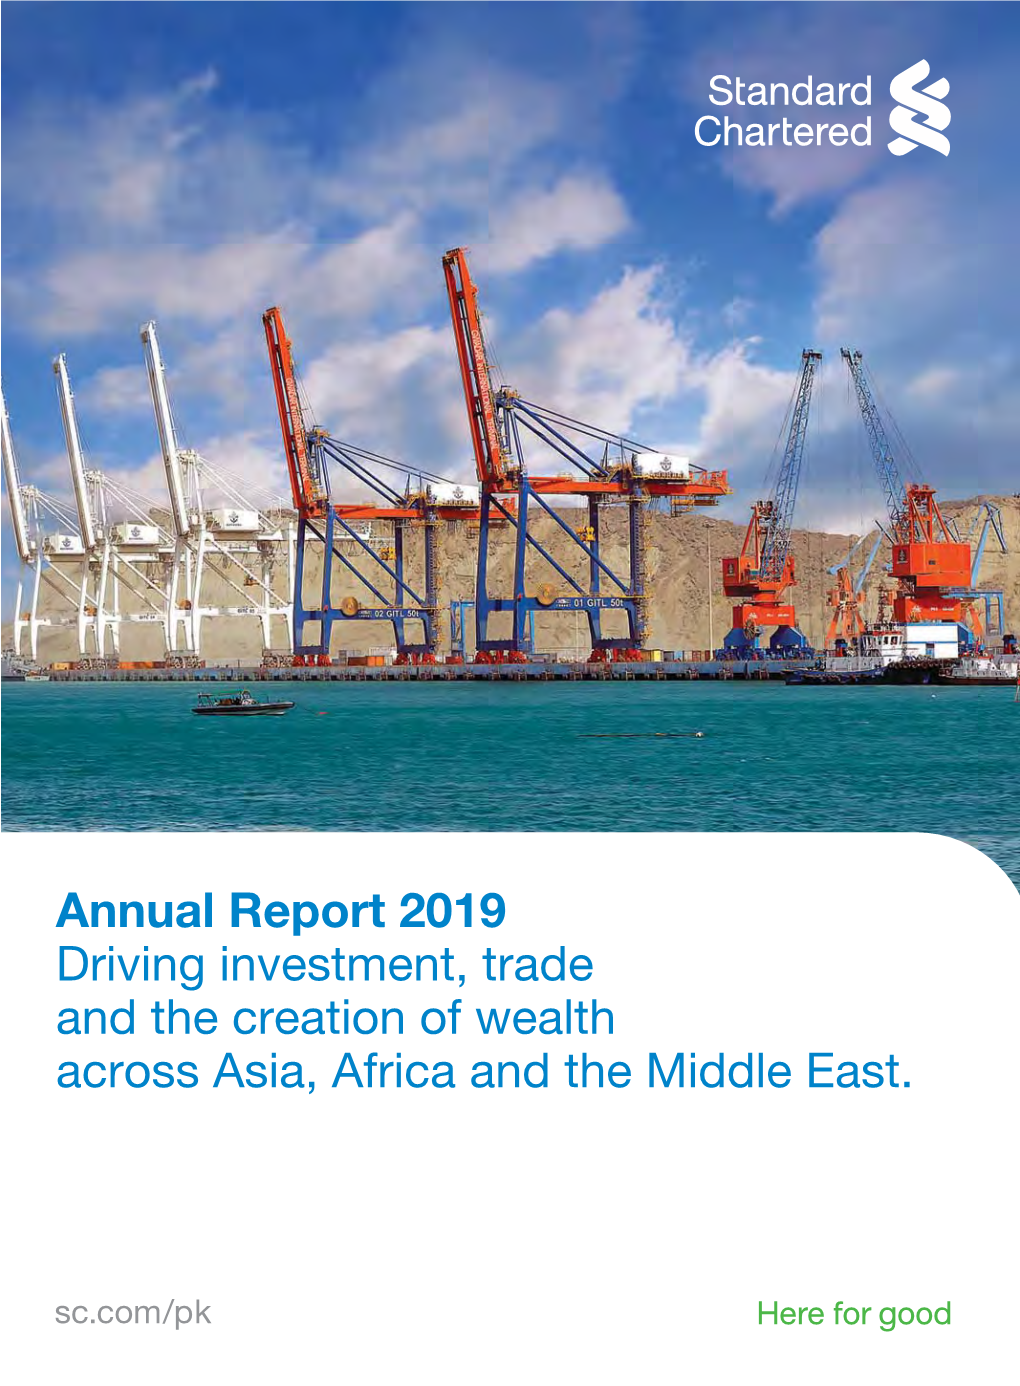 Annual Report 2019 Driving Investment, Trade and the Creation of Wealth Across Asia, Africa and the Middle East